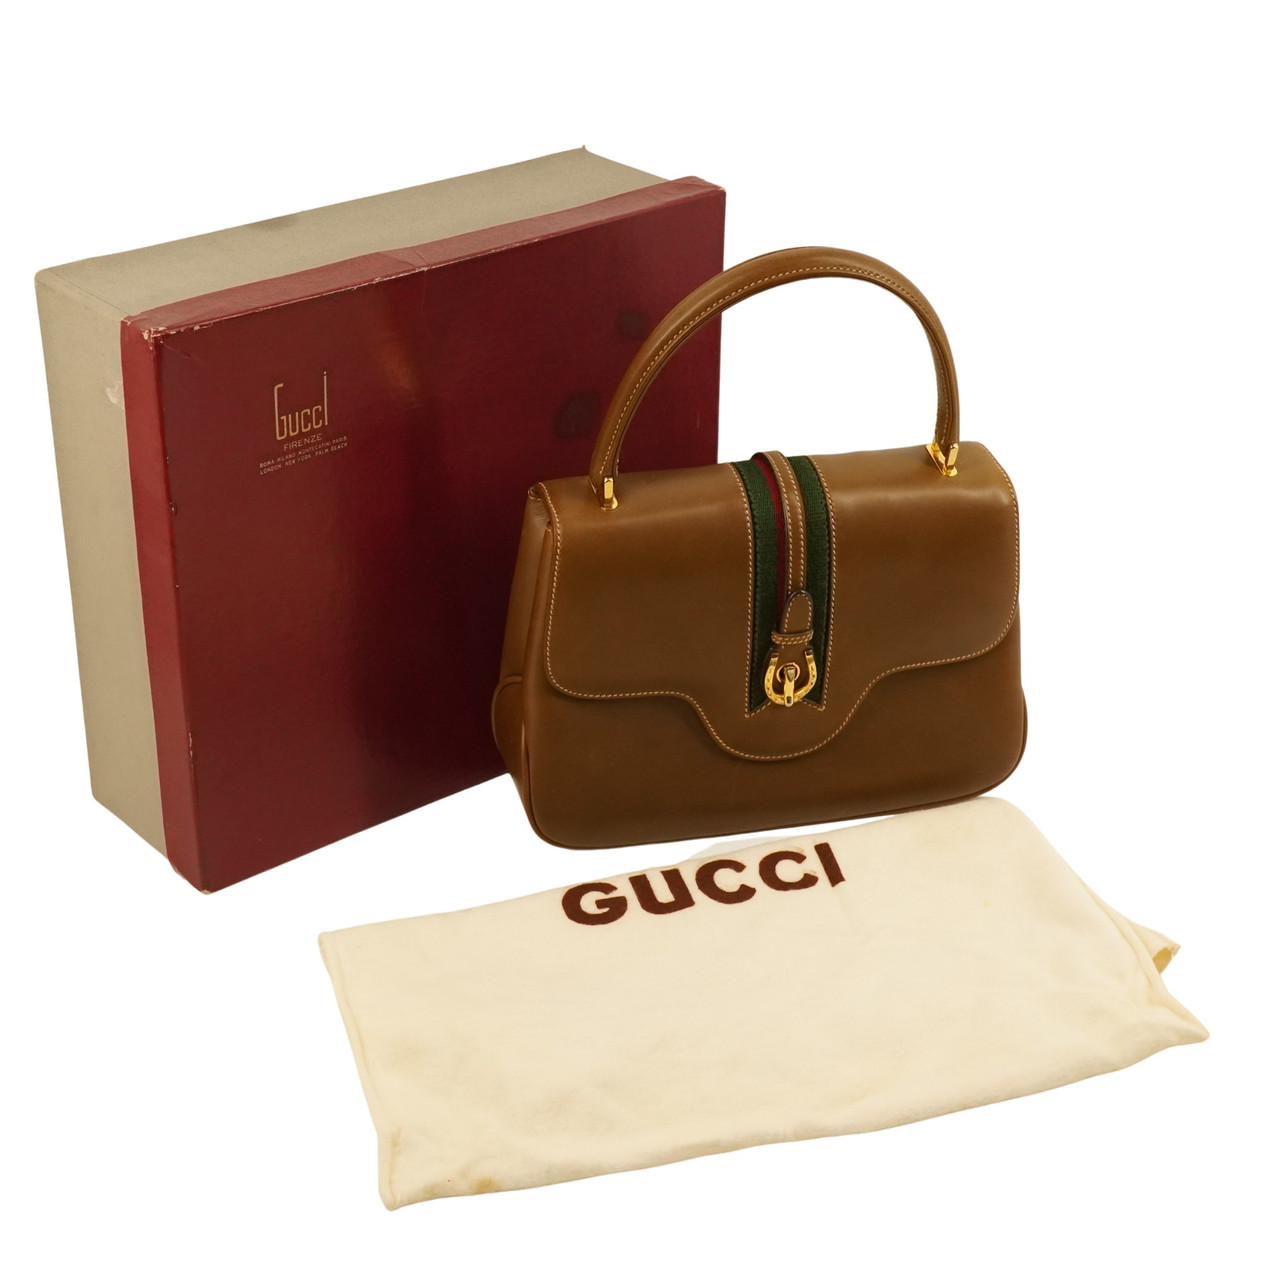 How To Spot A Fake Gucci Marmont Bag - Brands Blogger | Gucci marmont bag,  Gucci bag outfit, Fake designer bags